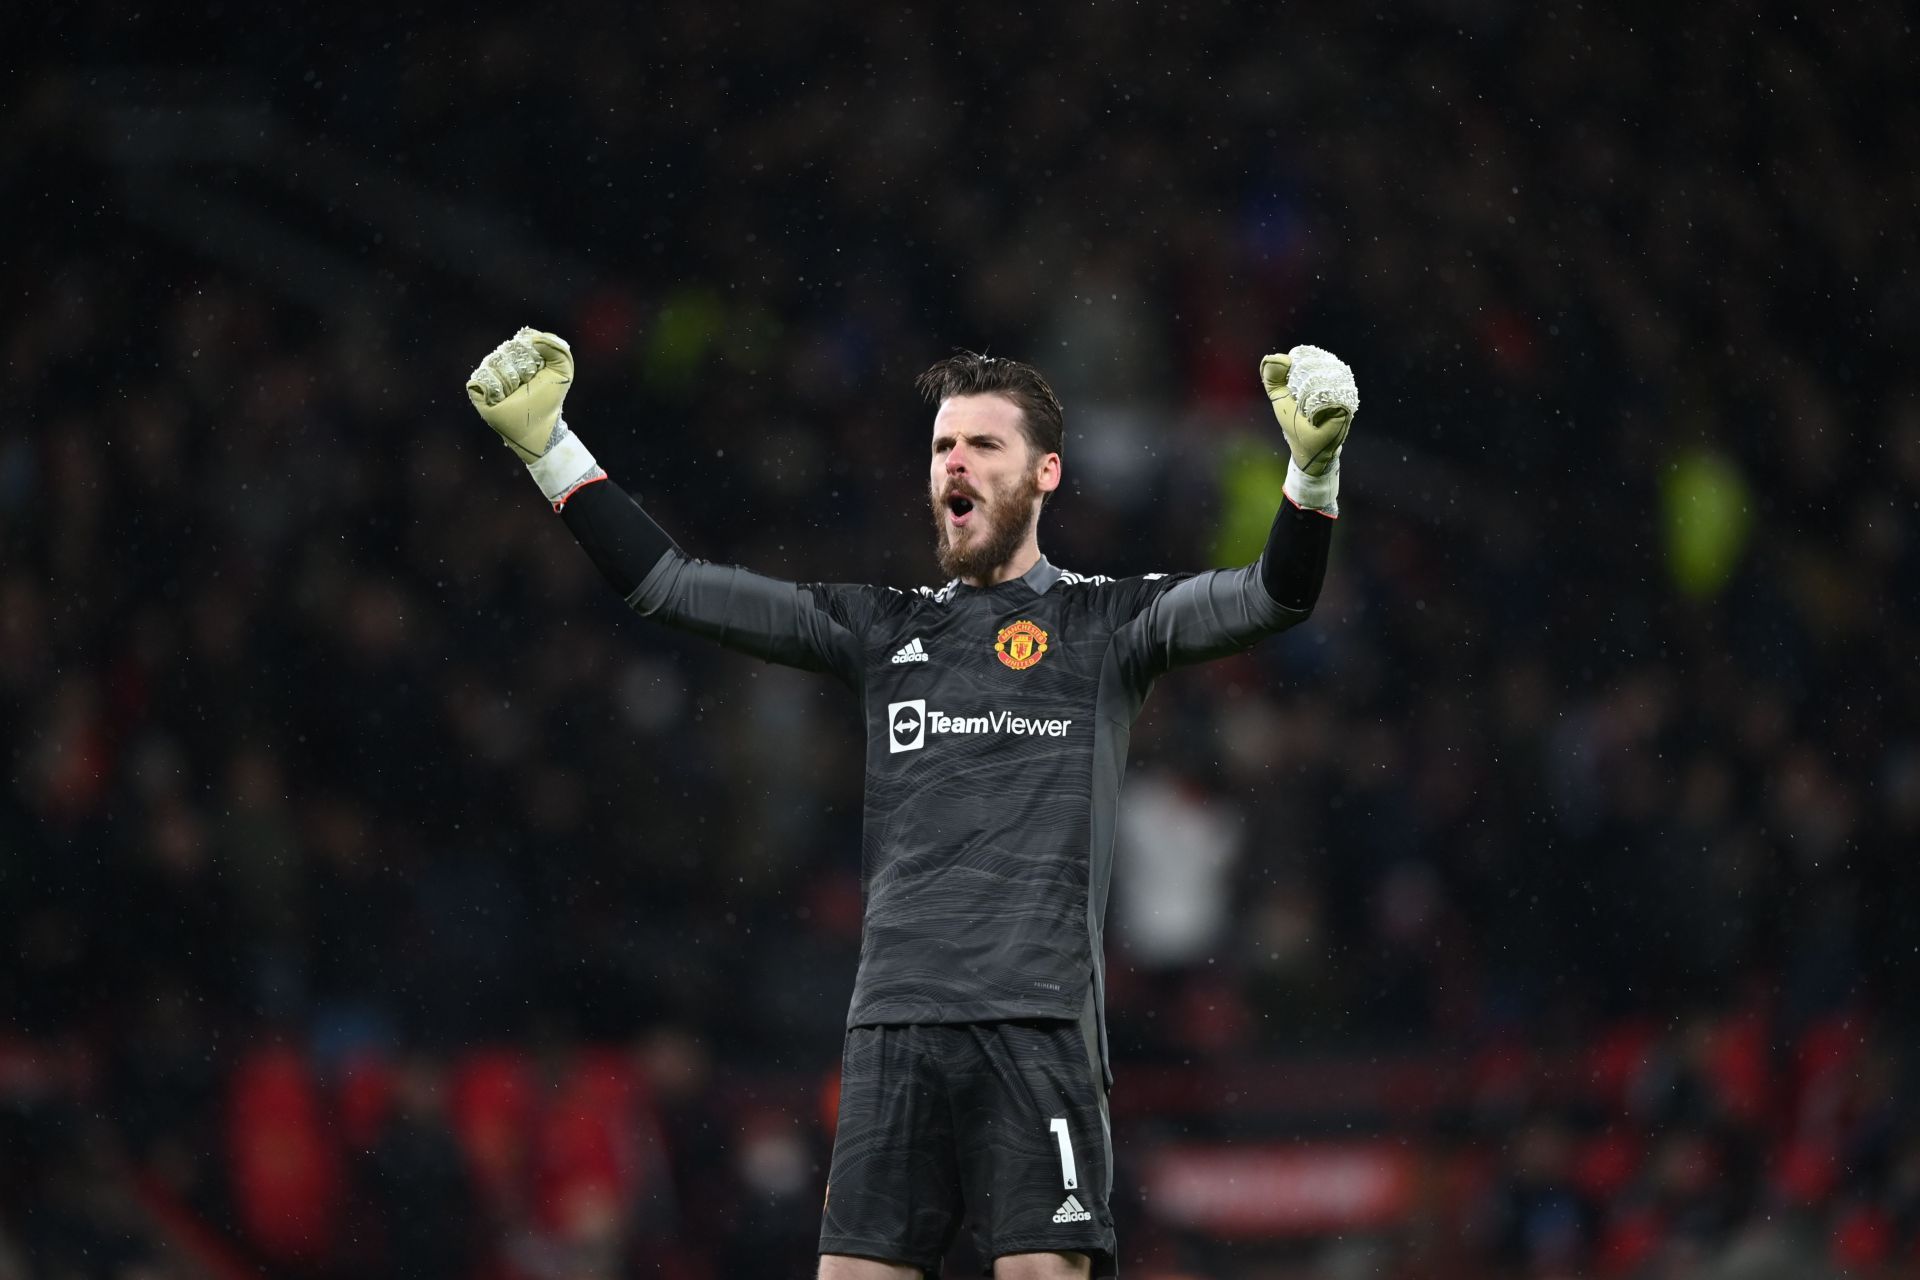 David de Gea has been a standout performer for Manchester United in the Premier League.